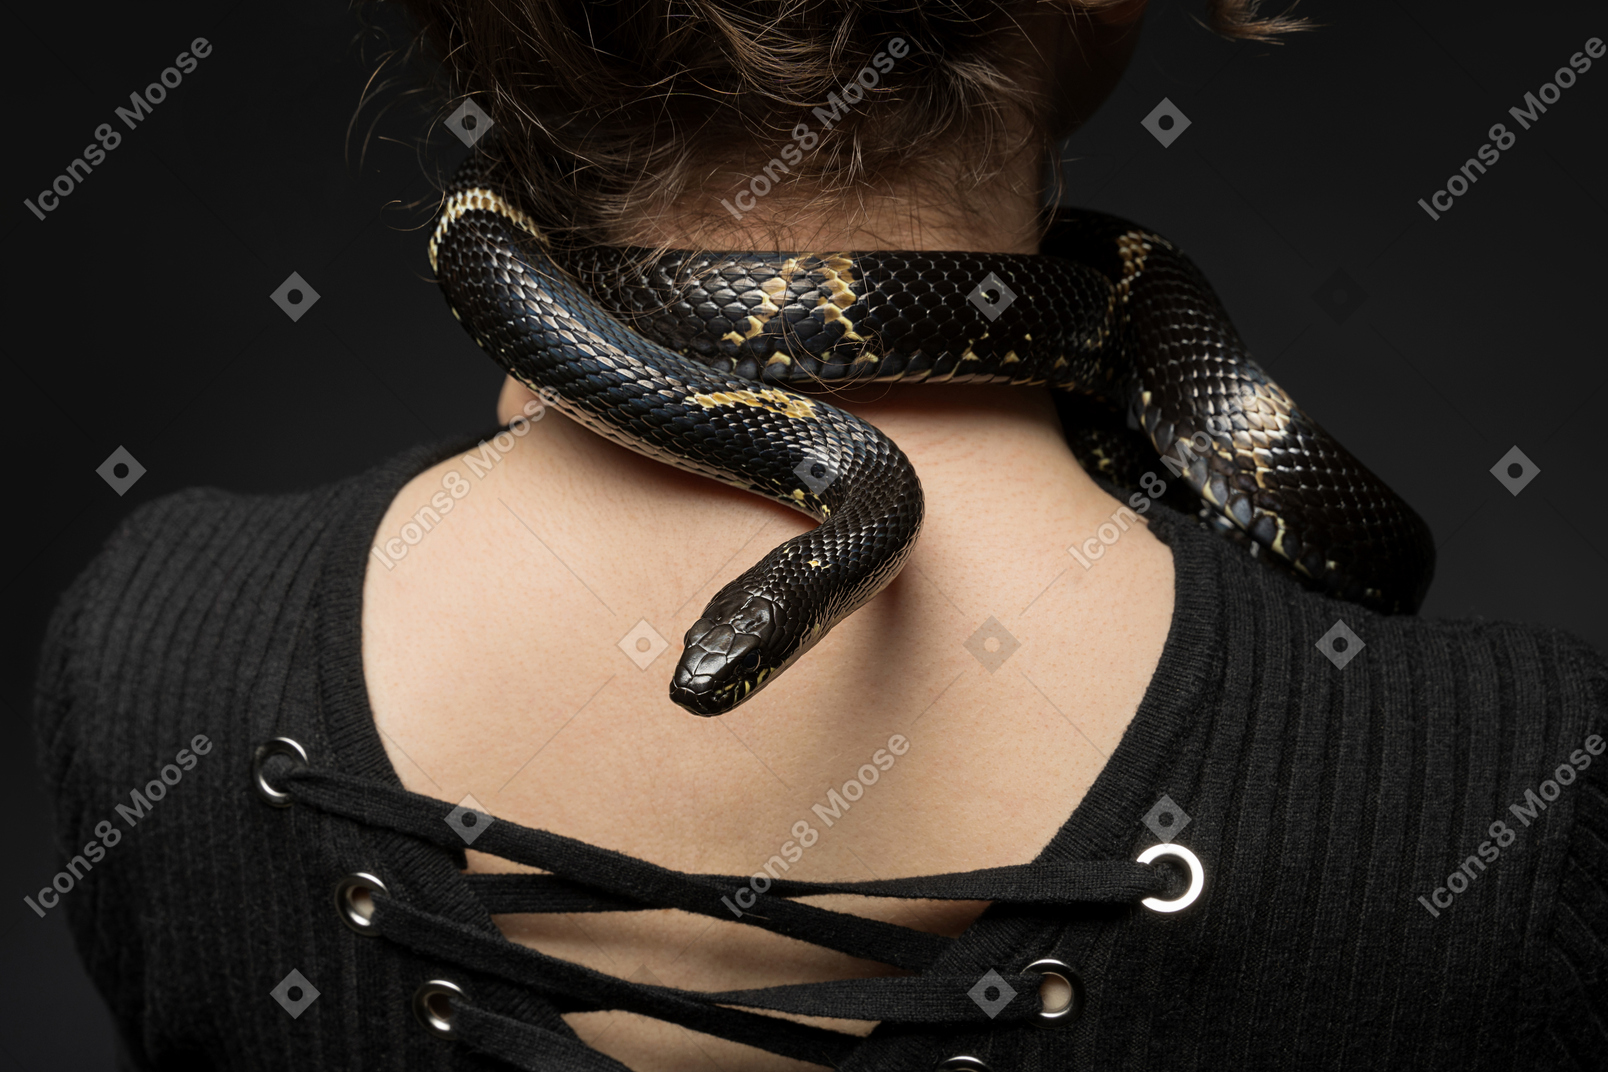 Striped black snake curving around woman's neck